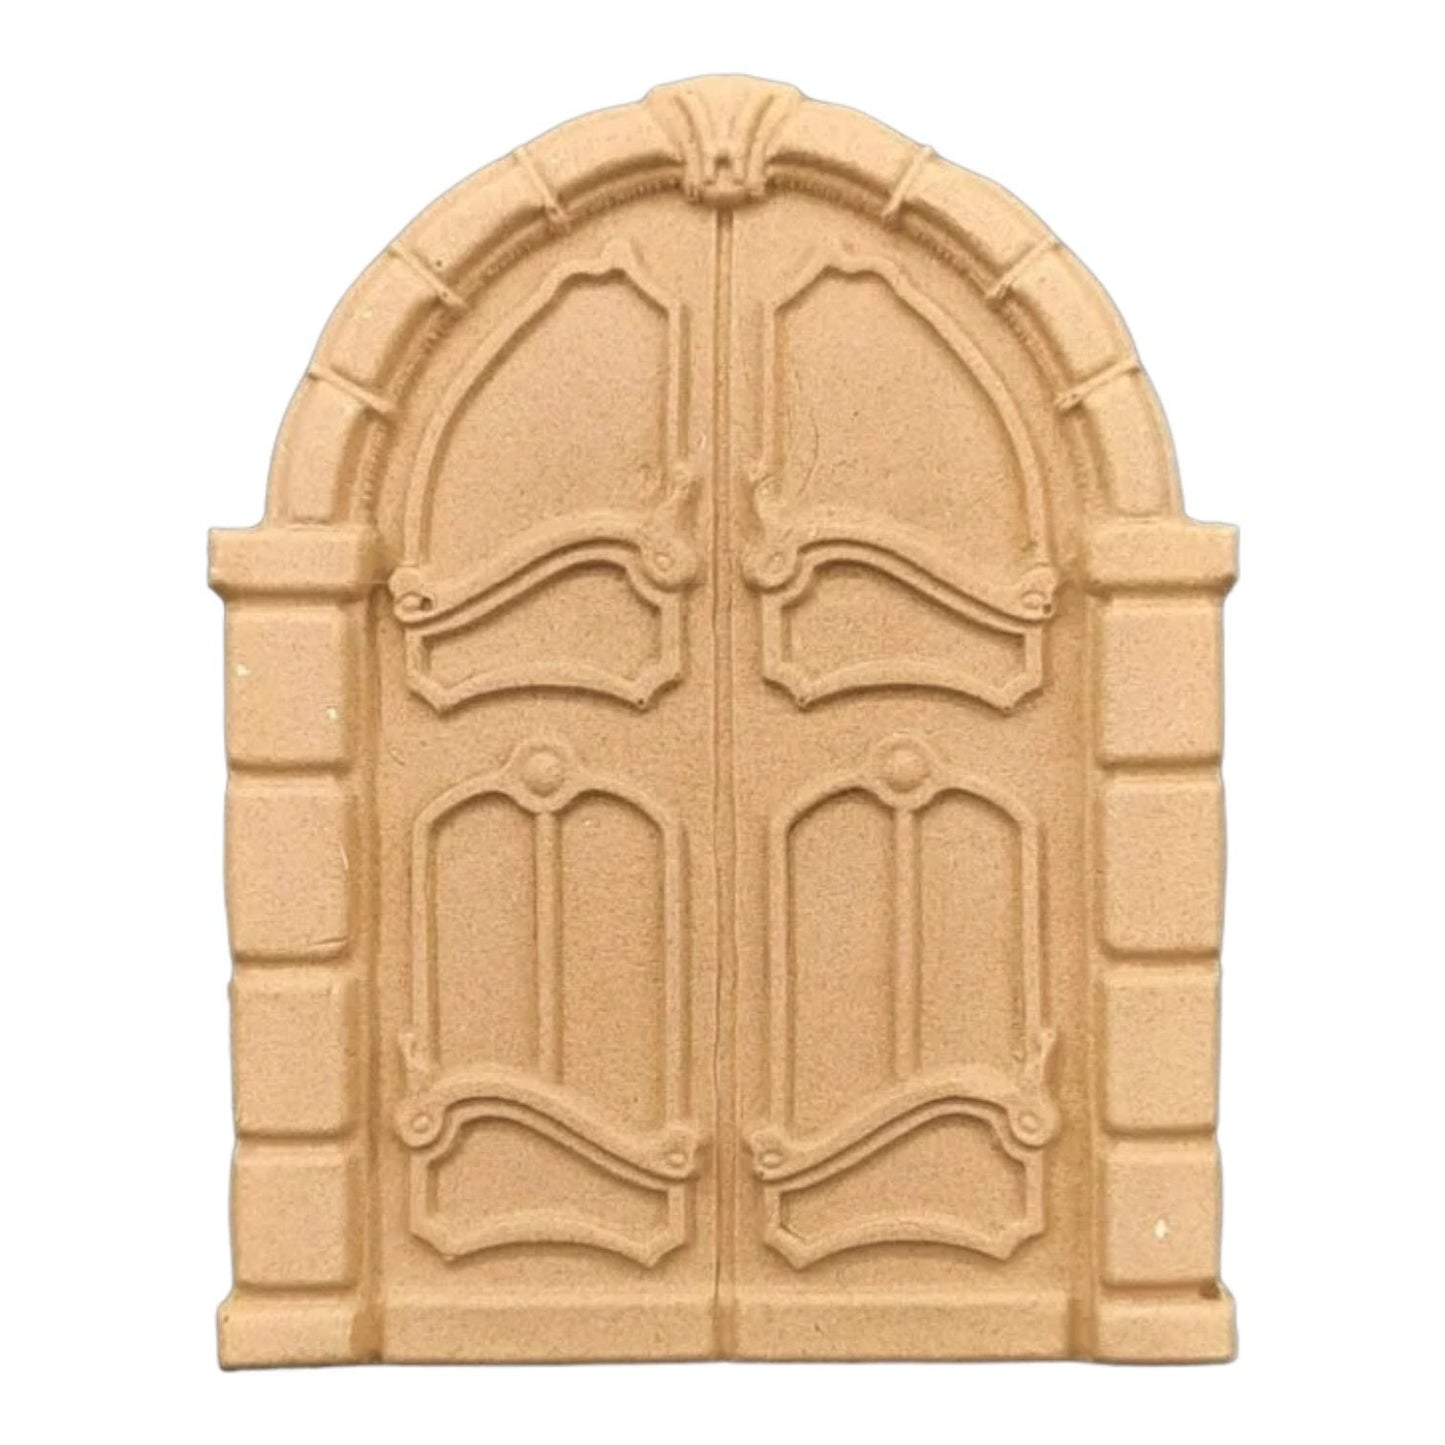 IFW 3601 Door embellishment, great for doll house